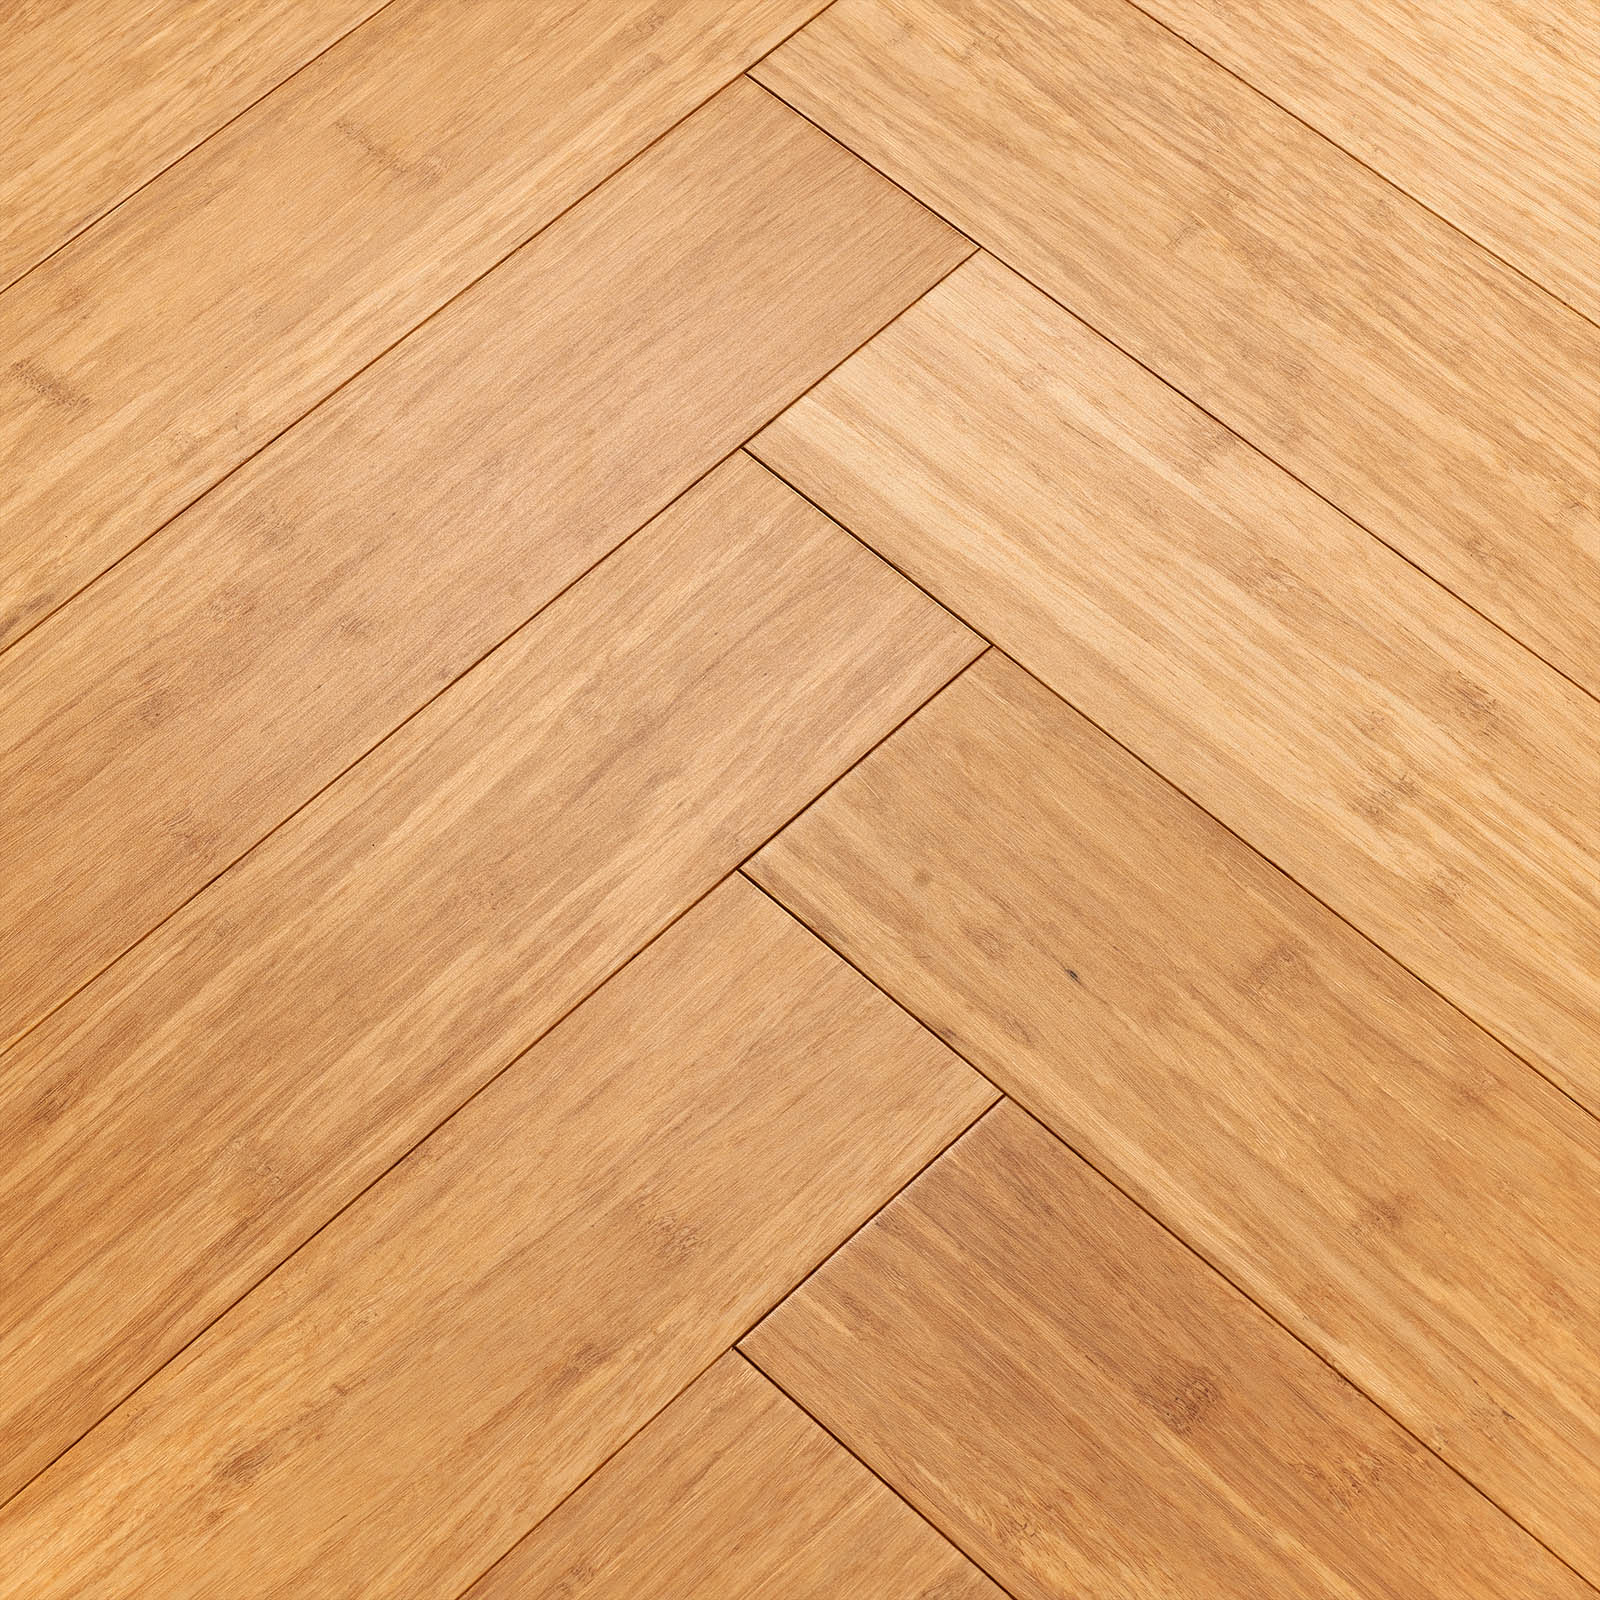 Oxwich Natural Strand Parquet Bamboo, Natures Element Laminate Flooring Reviews